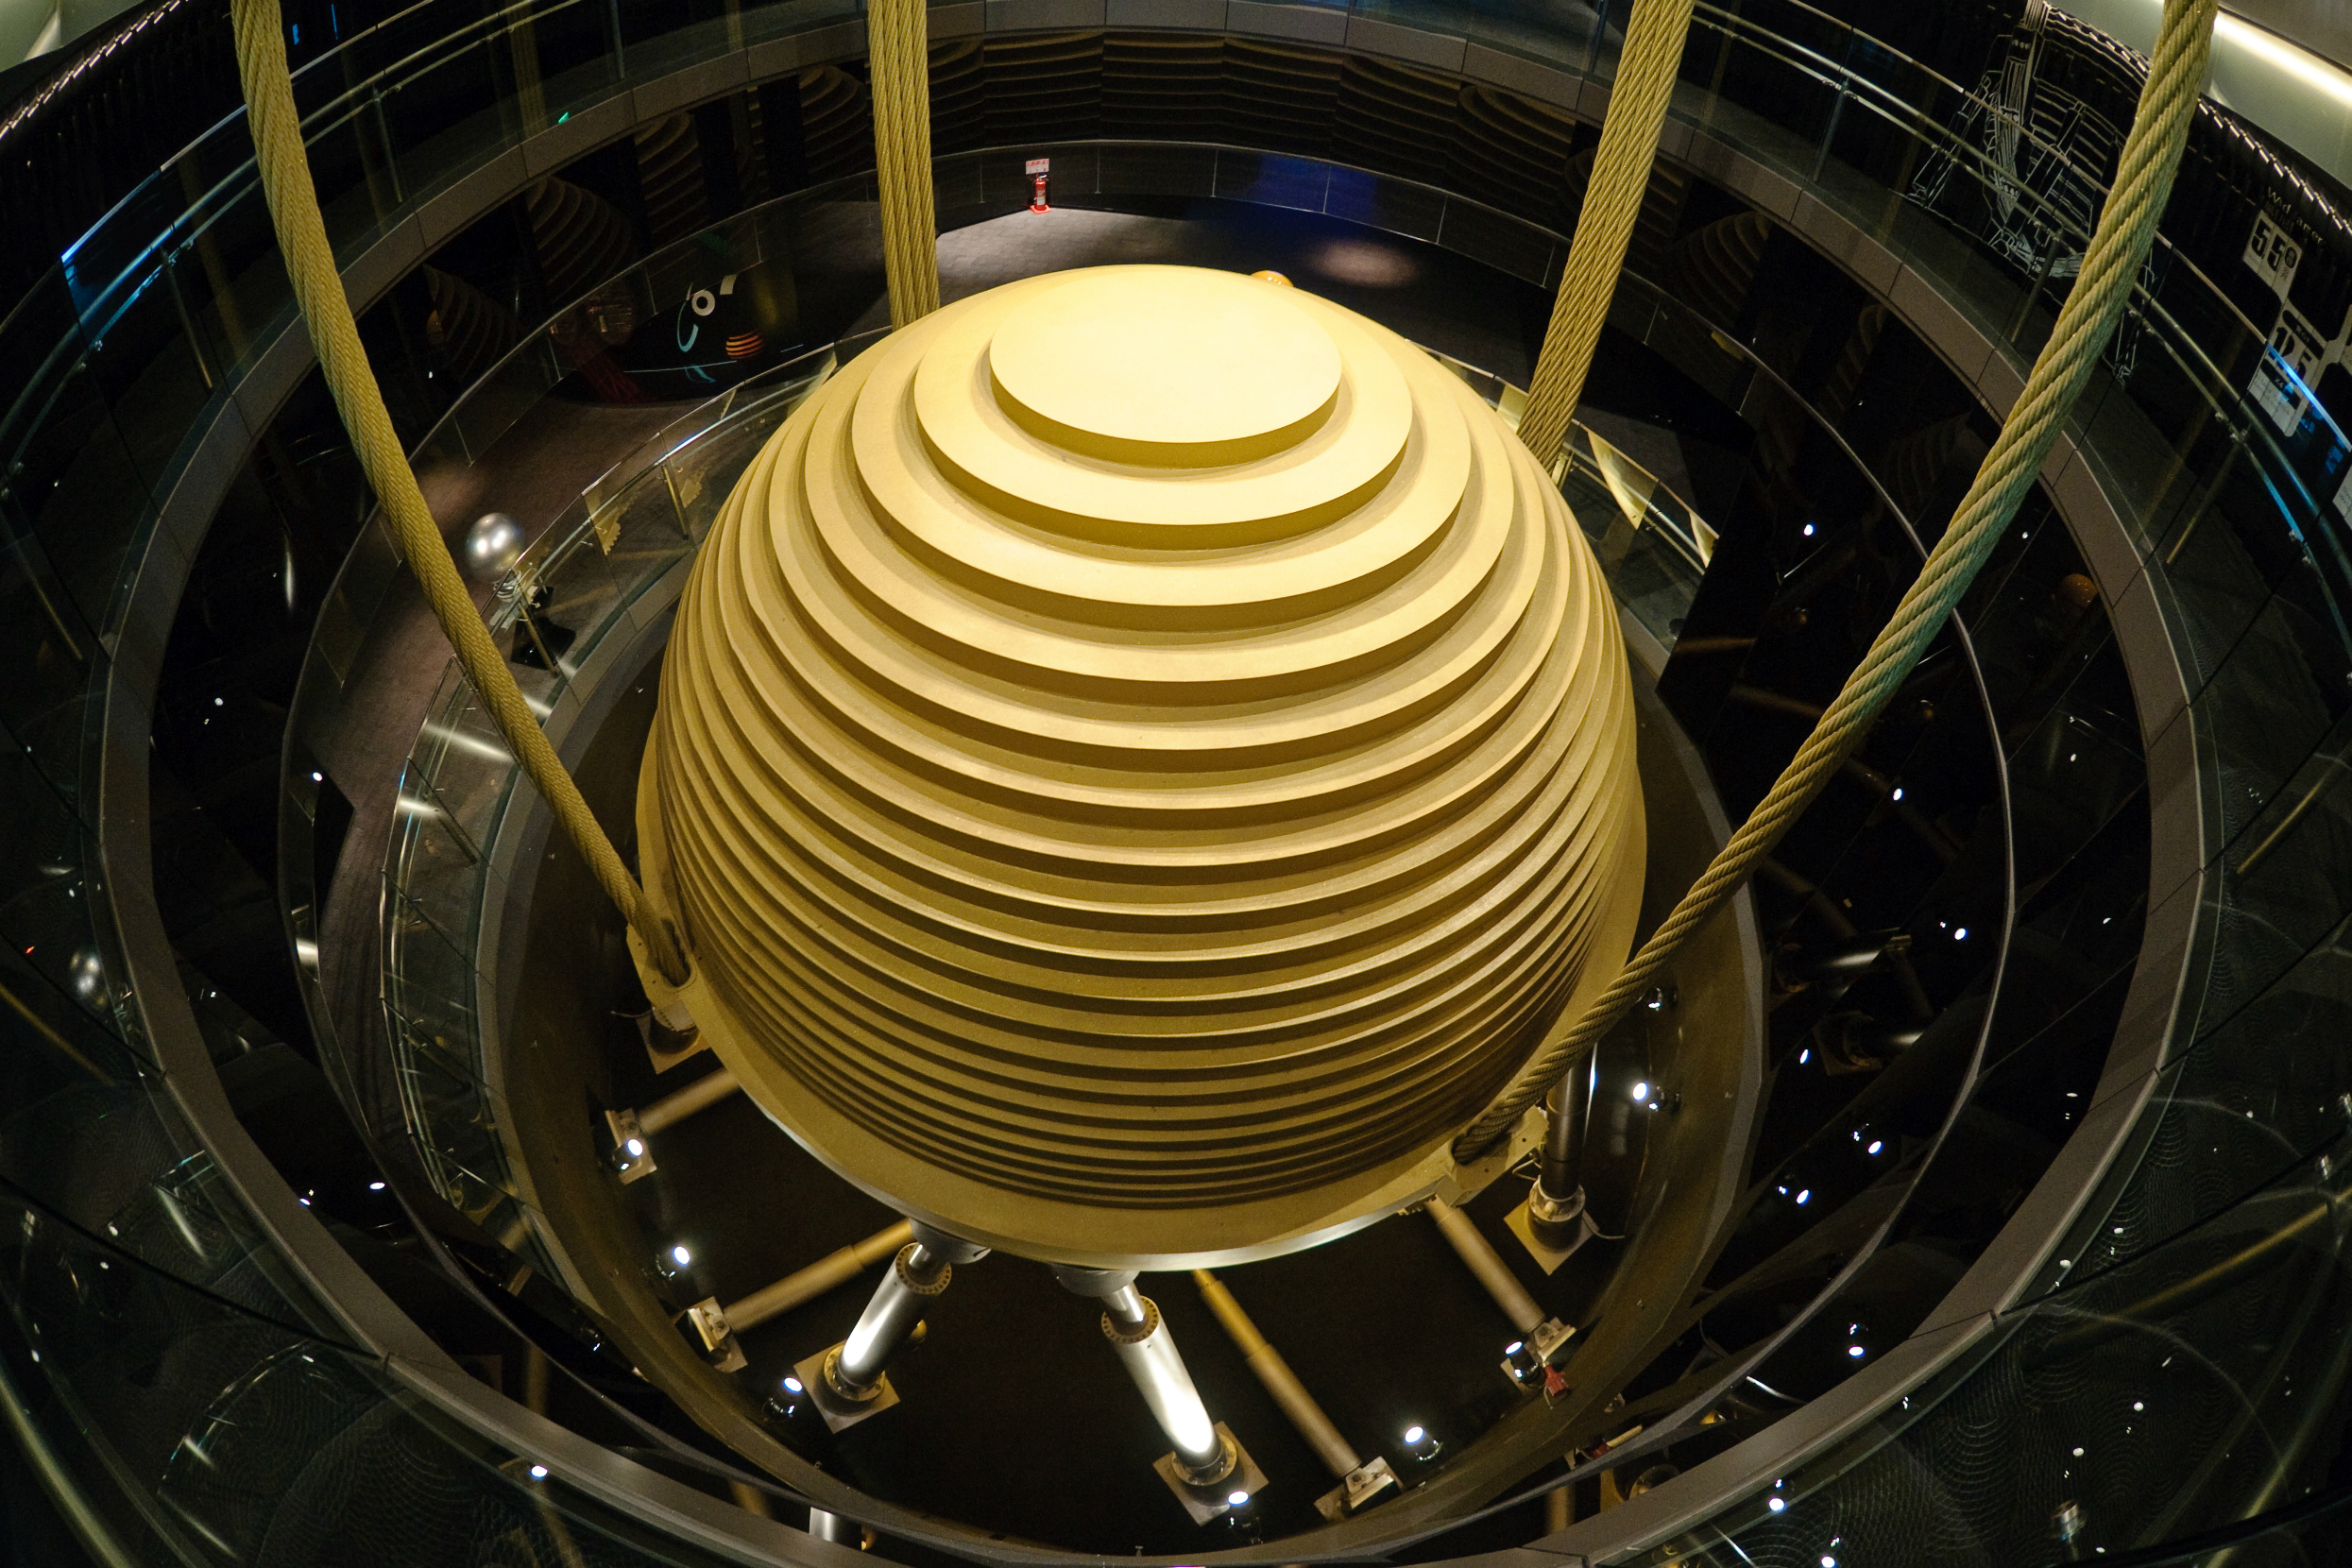 earthquake resistant buildings taipei 101 tuned mass damper 2010